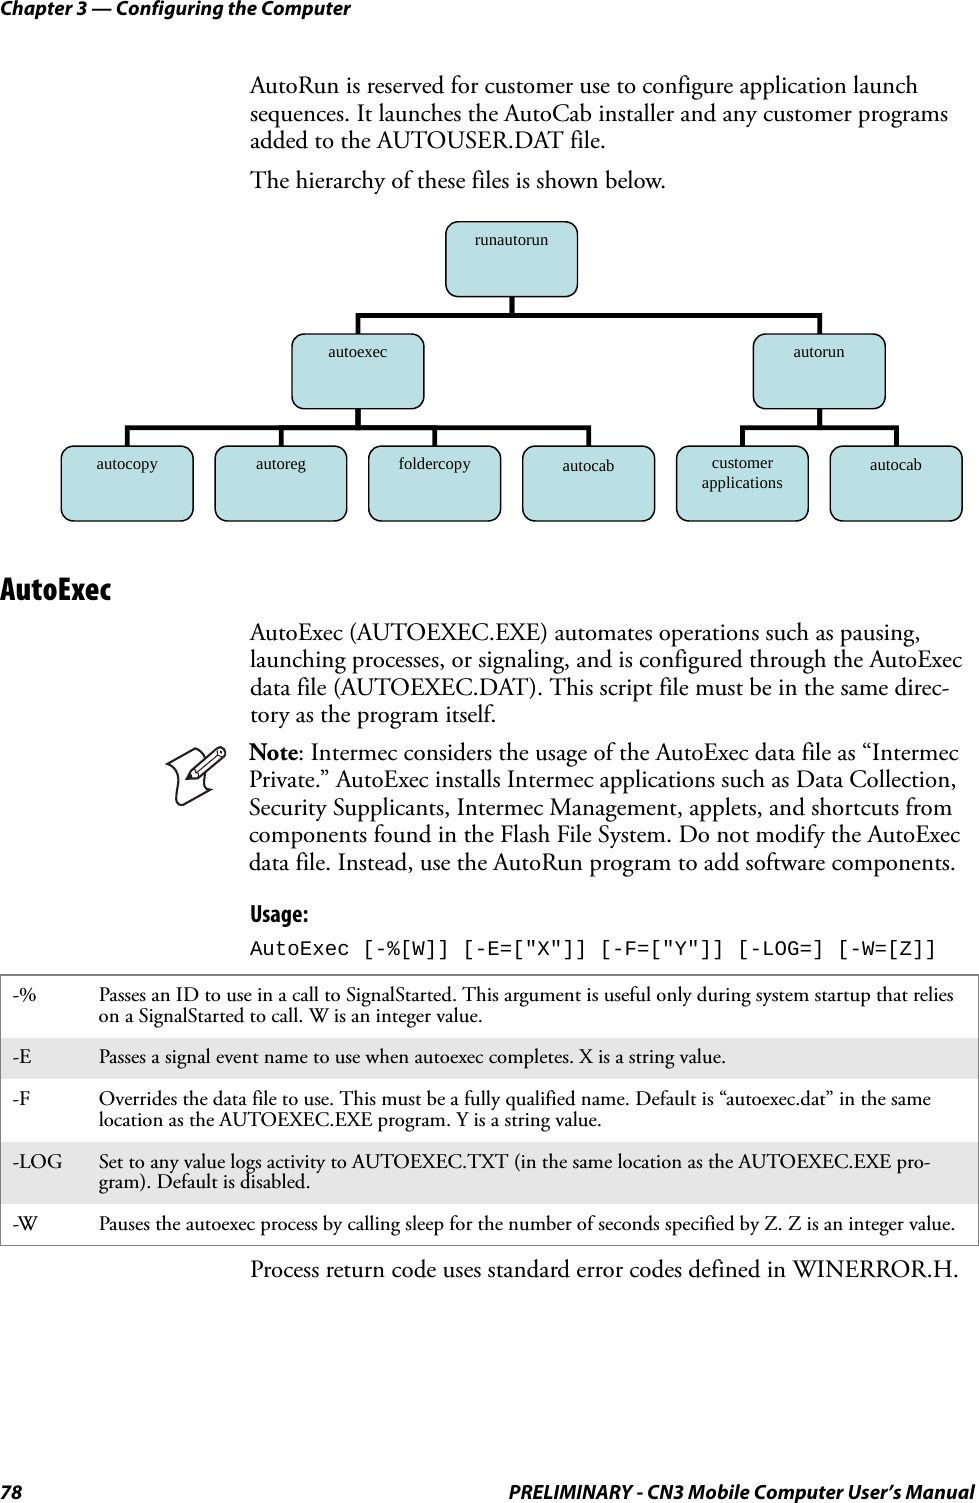 Chapter 3 — Configuring the Computer78 PRELIMINARY - CN3 Mobile Computer User’s ManualAutoRun is reserved for customer use to configure application launch sequences. It launches the AutoCab installer and any customer programs added to the AUTOUSER.DAT file. The hierarchy of these files is shown below.AutoExecAutoExec (AUTOEXEC.EXE) automates operations such as pausing, launching processes, or signaling, and is configured through the AutoExec data file (AUTOEXEC.DAT). This script file must be in the same direc-tory as the program itself. Usage: AutoExec [-%[W]] [-E=[&quot;X&quot;]] [-F=[&quot;Y&quot;]] [-LOG=] [-W=[Z]]Process return code uses standard error codes defined in WINERROR.H.Note: Intermec considers the usage of the AutoExec data file as “Intermec Private.” AutoExec installs Intermec applications such as Data Collection, Security Supplicants, Intermec Management, applets, and shortcuts from components found in the Flash File System. Do not modify the AutoExec data file. Instead, use the AutoRun program to add software components.-% Passes an ID to use in a call to SignalStarted. This argument is useful only during system startup that relies on a SignalStarted to call. W is an integer value.-E Passes a signal event name to use when autoexec completes. X is a string value.-F Overrides the data file to use. This must be a fully qualified name. Default is “autoexec.dat” in the same location as the AUTOEXEC.EXE program. Y is a string value.-LOG Set to any value logs activity to AUTOEXEC.TXT (in the same location as the AUTOEXEC.EXE pro-gram). Default is disabled.-W Pauses the autoexec process by calling sleep for the number of seconds specified by Z. Z is an integer value.runautorun autoexec  autorun autocopy  autoreg  foldercopy  customer applications  autocab autocab 